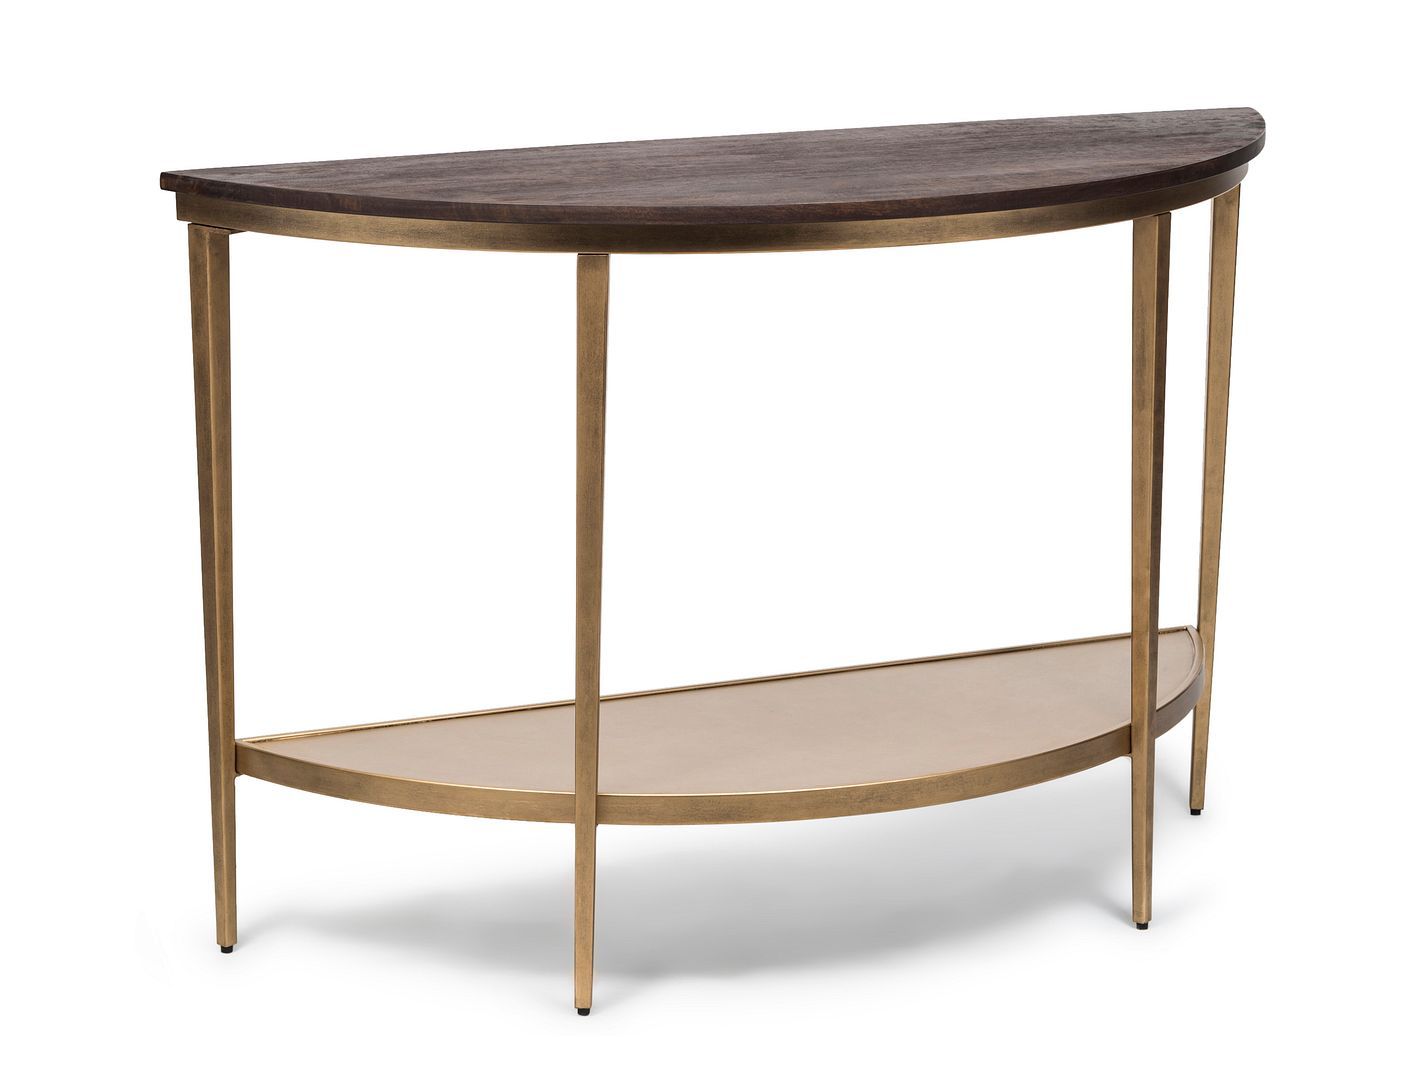 Half Round Iron Hallway Console Table With Wood Top – Dark French Brass Throughout Round Console Tables (View 11 of 20)